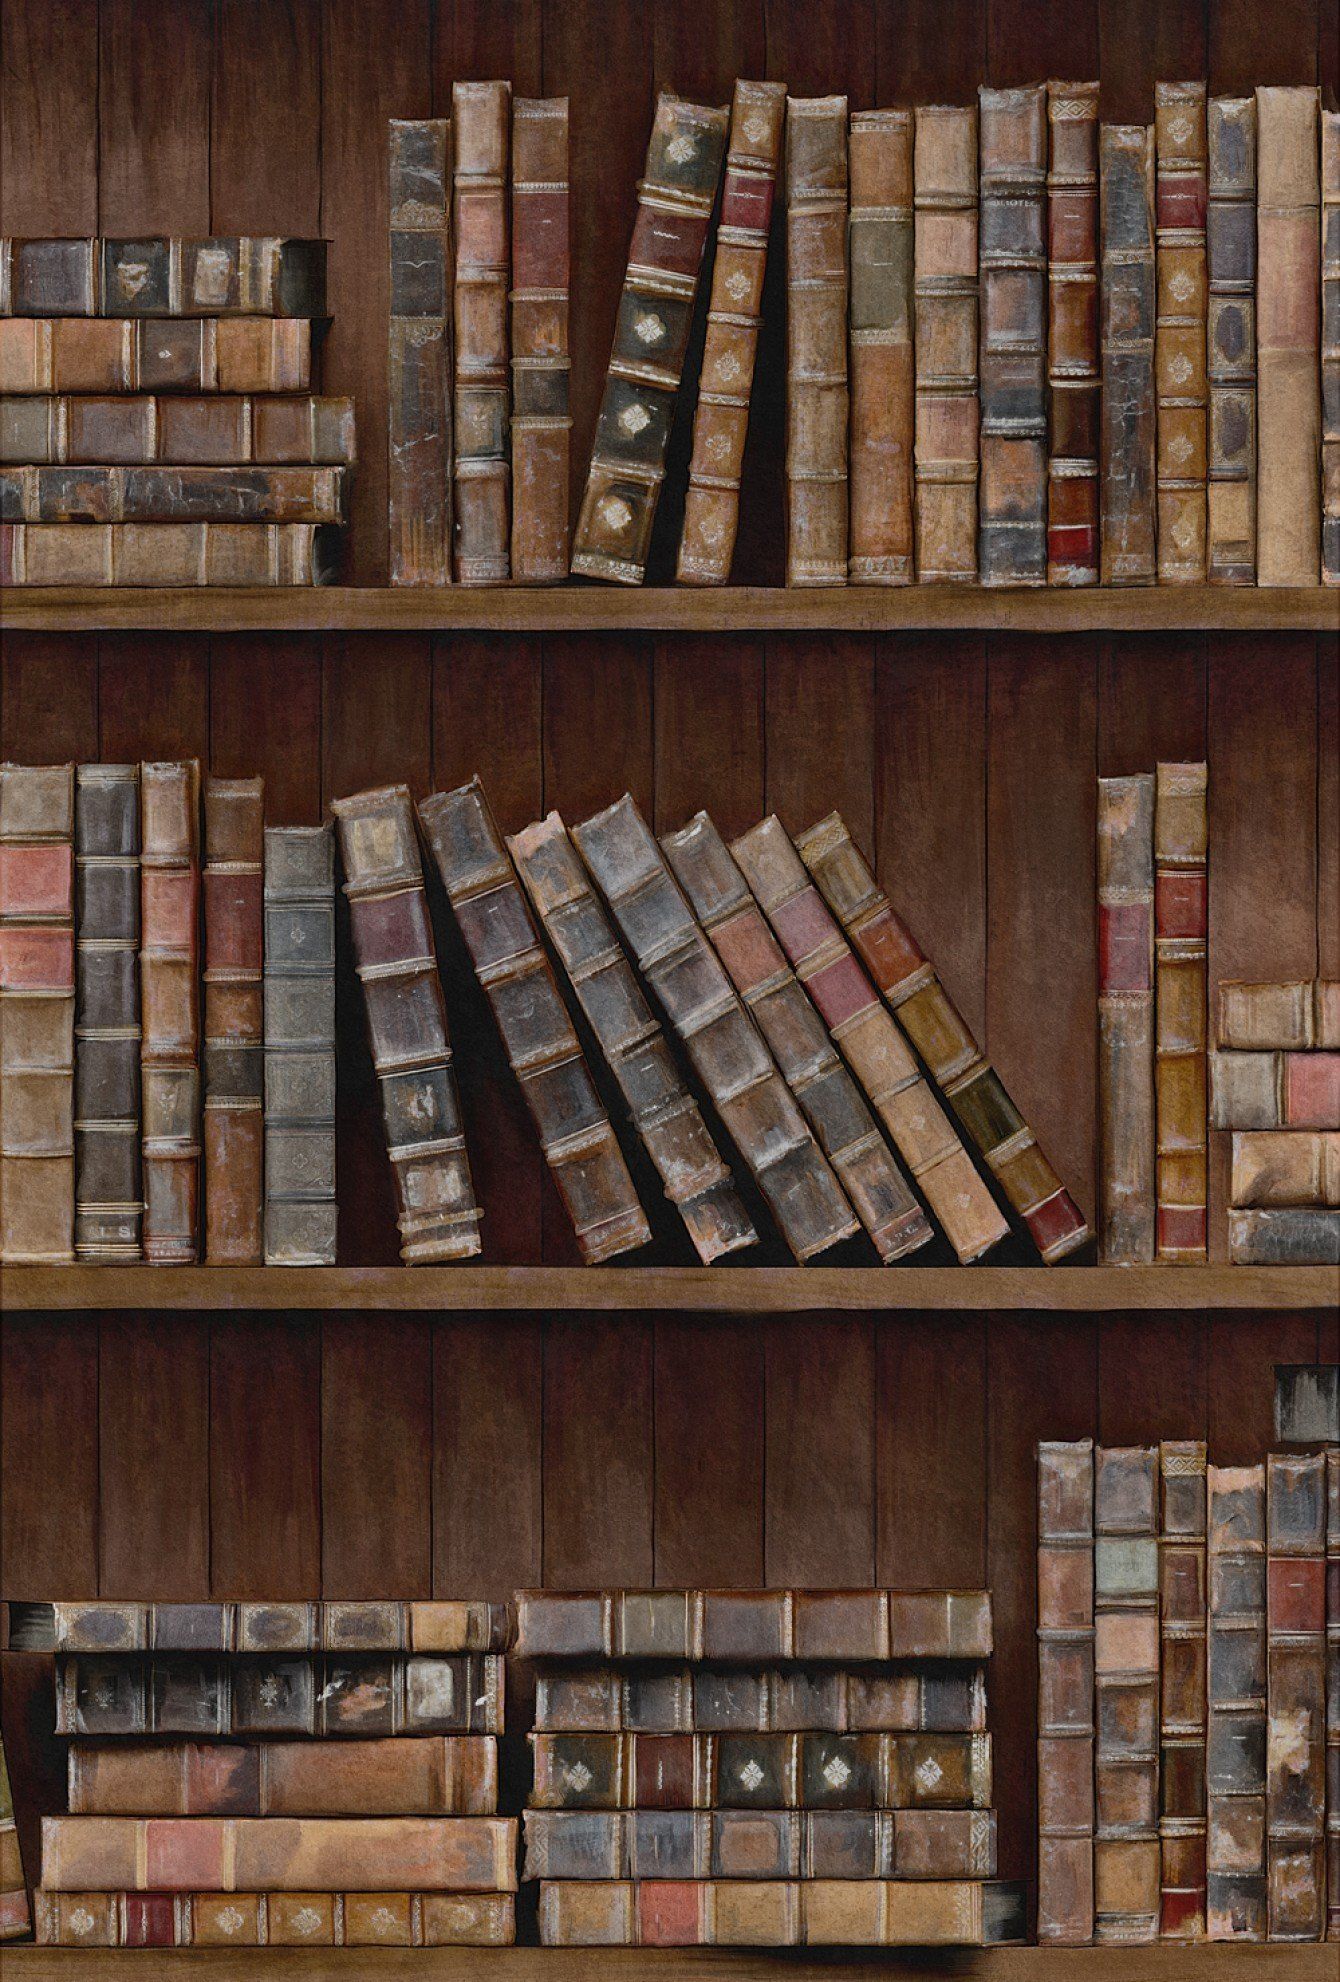 A painting of many old books on shelves - Library, bookshelf